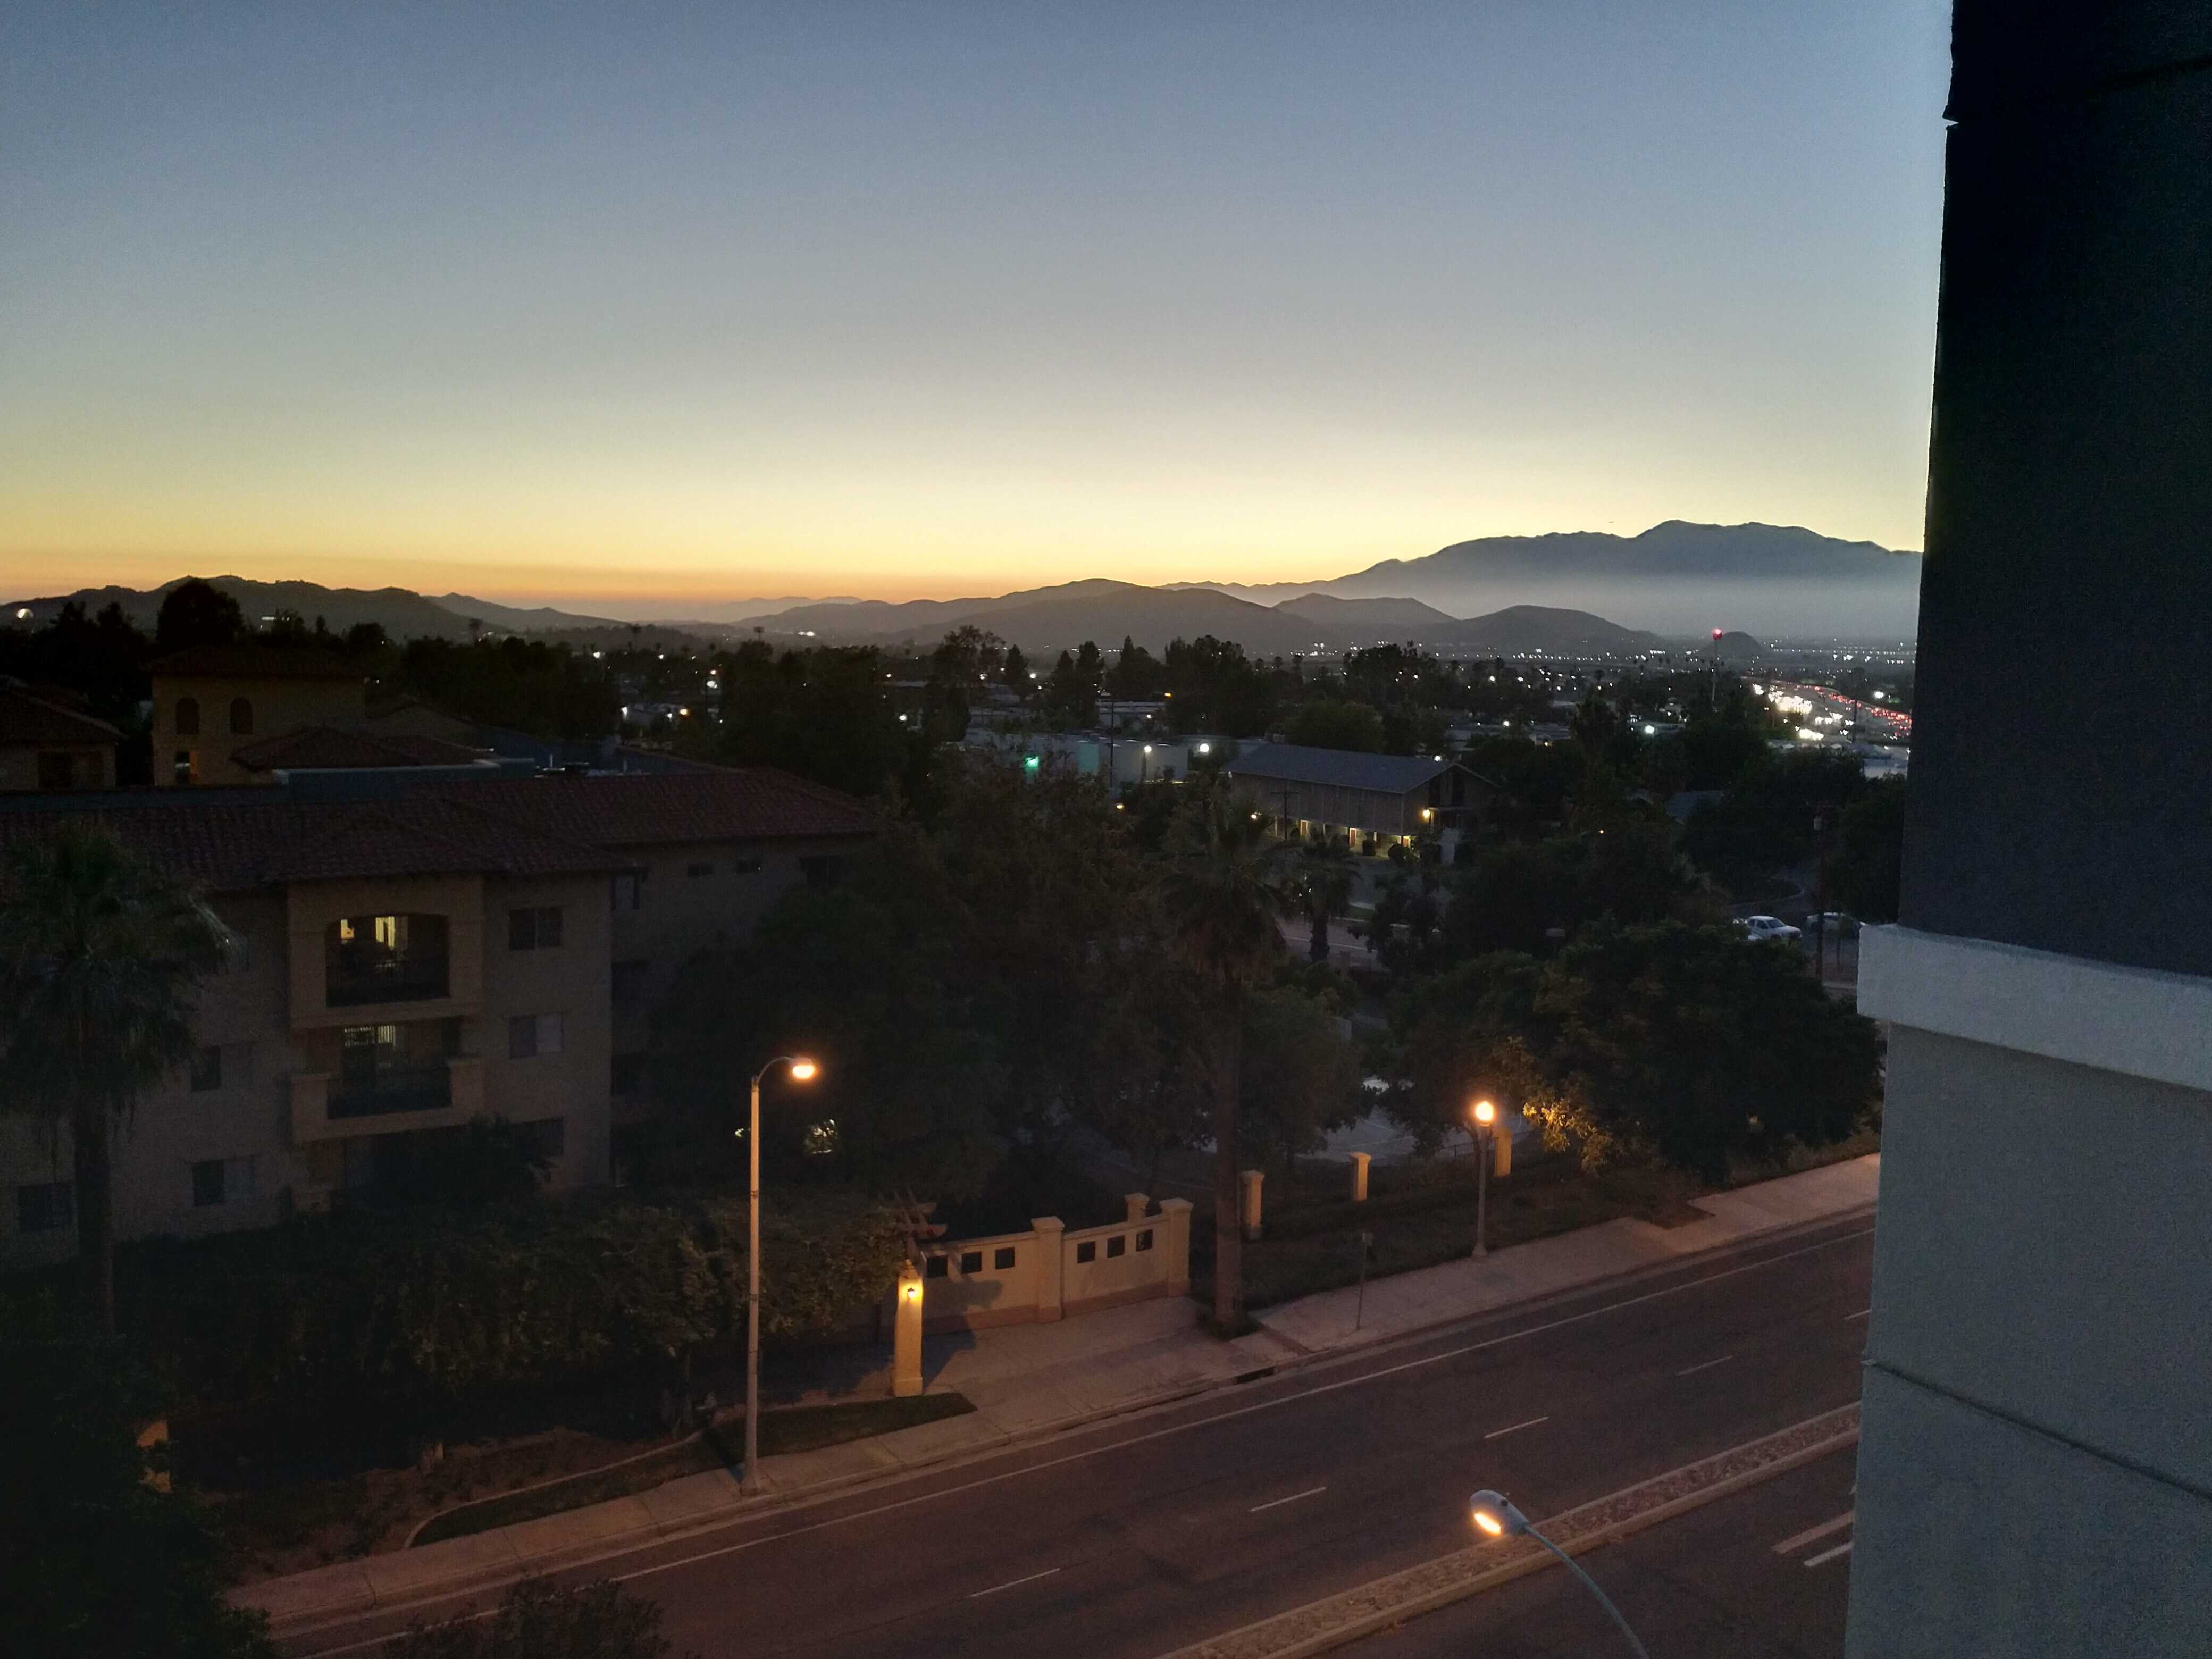 The view from the balcony of my apartment in Riverside.